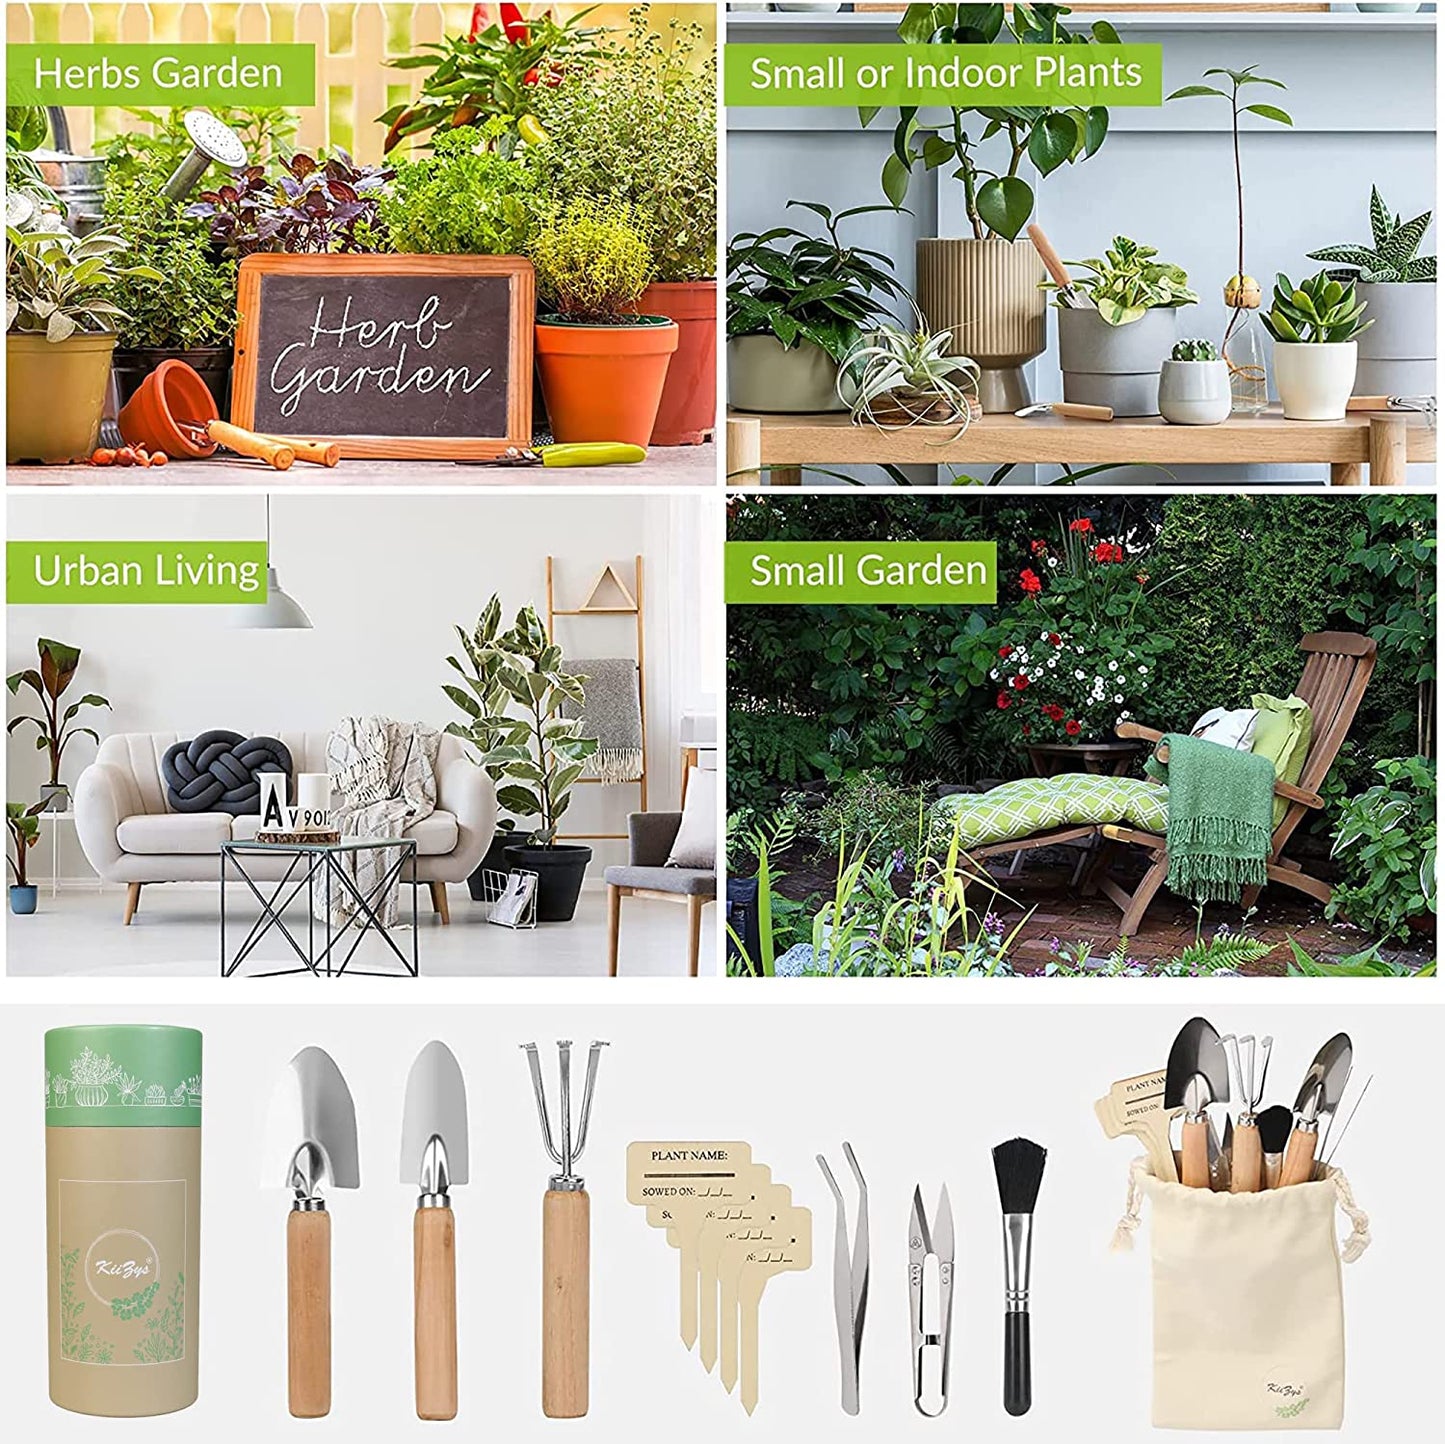 indoor herb garden gardening hand tools mothers day gifts for mom cylinder box grandparents mothers moms  hobbies for women spiritual gifts for women small tool kit mom gifts from daughters plant accessories indoor mini tool kit birthday gifts for grandma great grandma gifts house warming gift house plant accessories plant care fathers day gifts for dad mens teenagers teachers boss brother sister thanksgiving xmas christmas gifts prsents